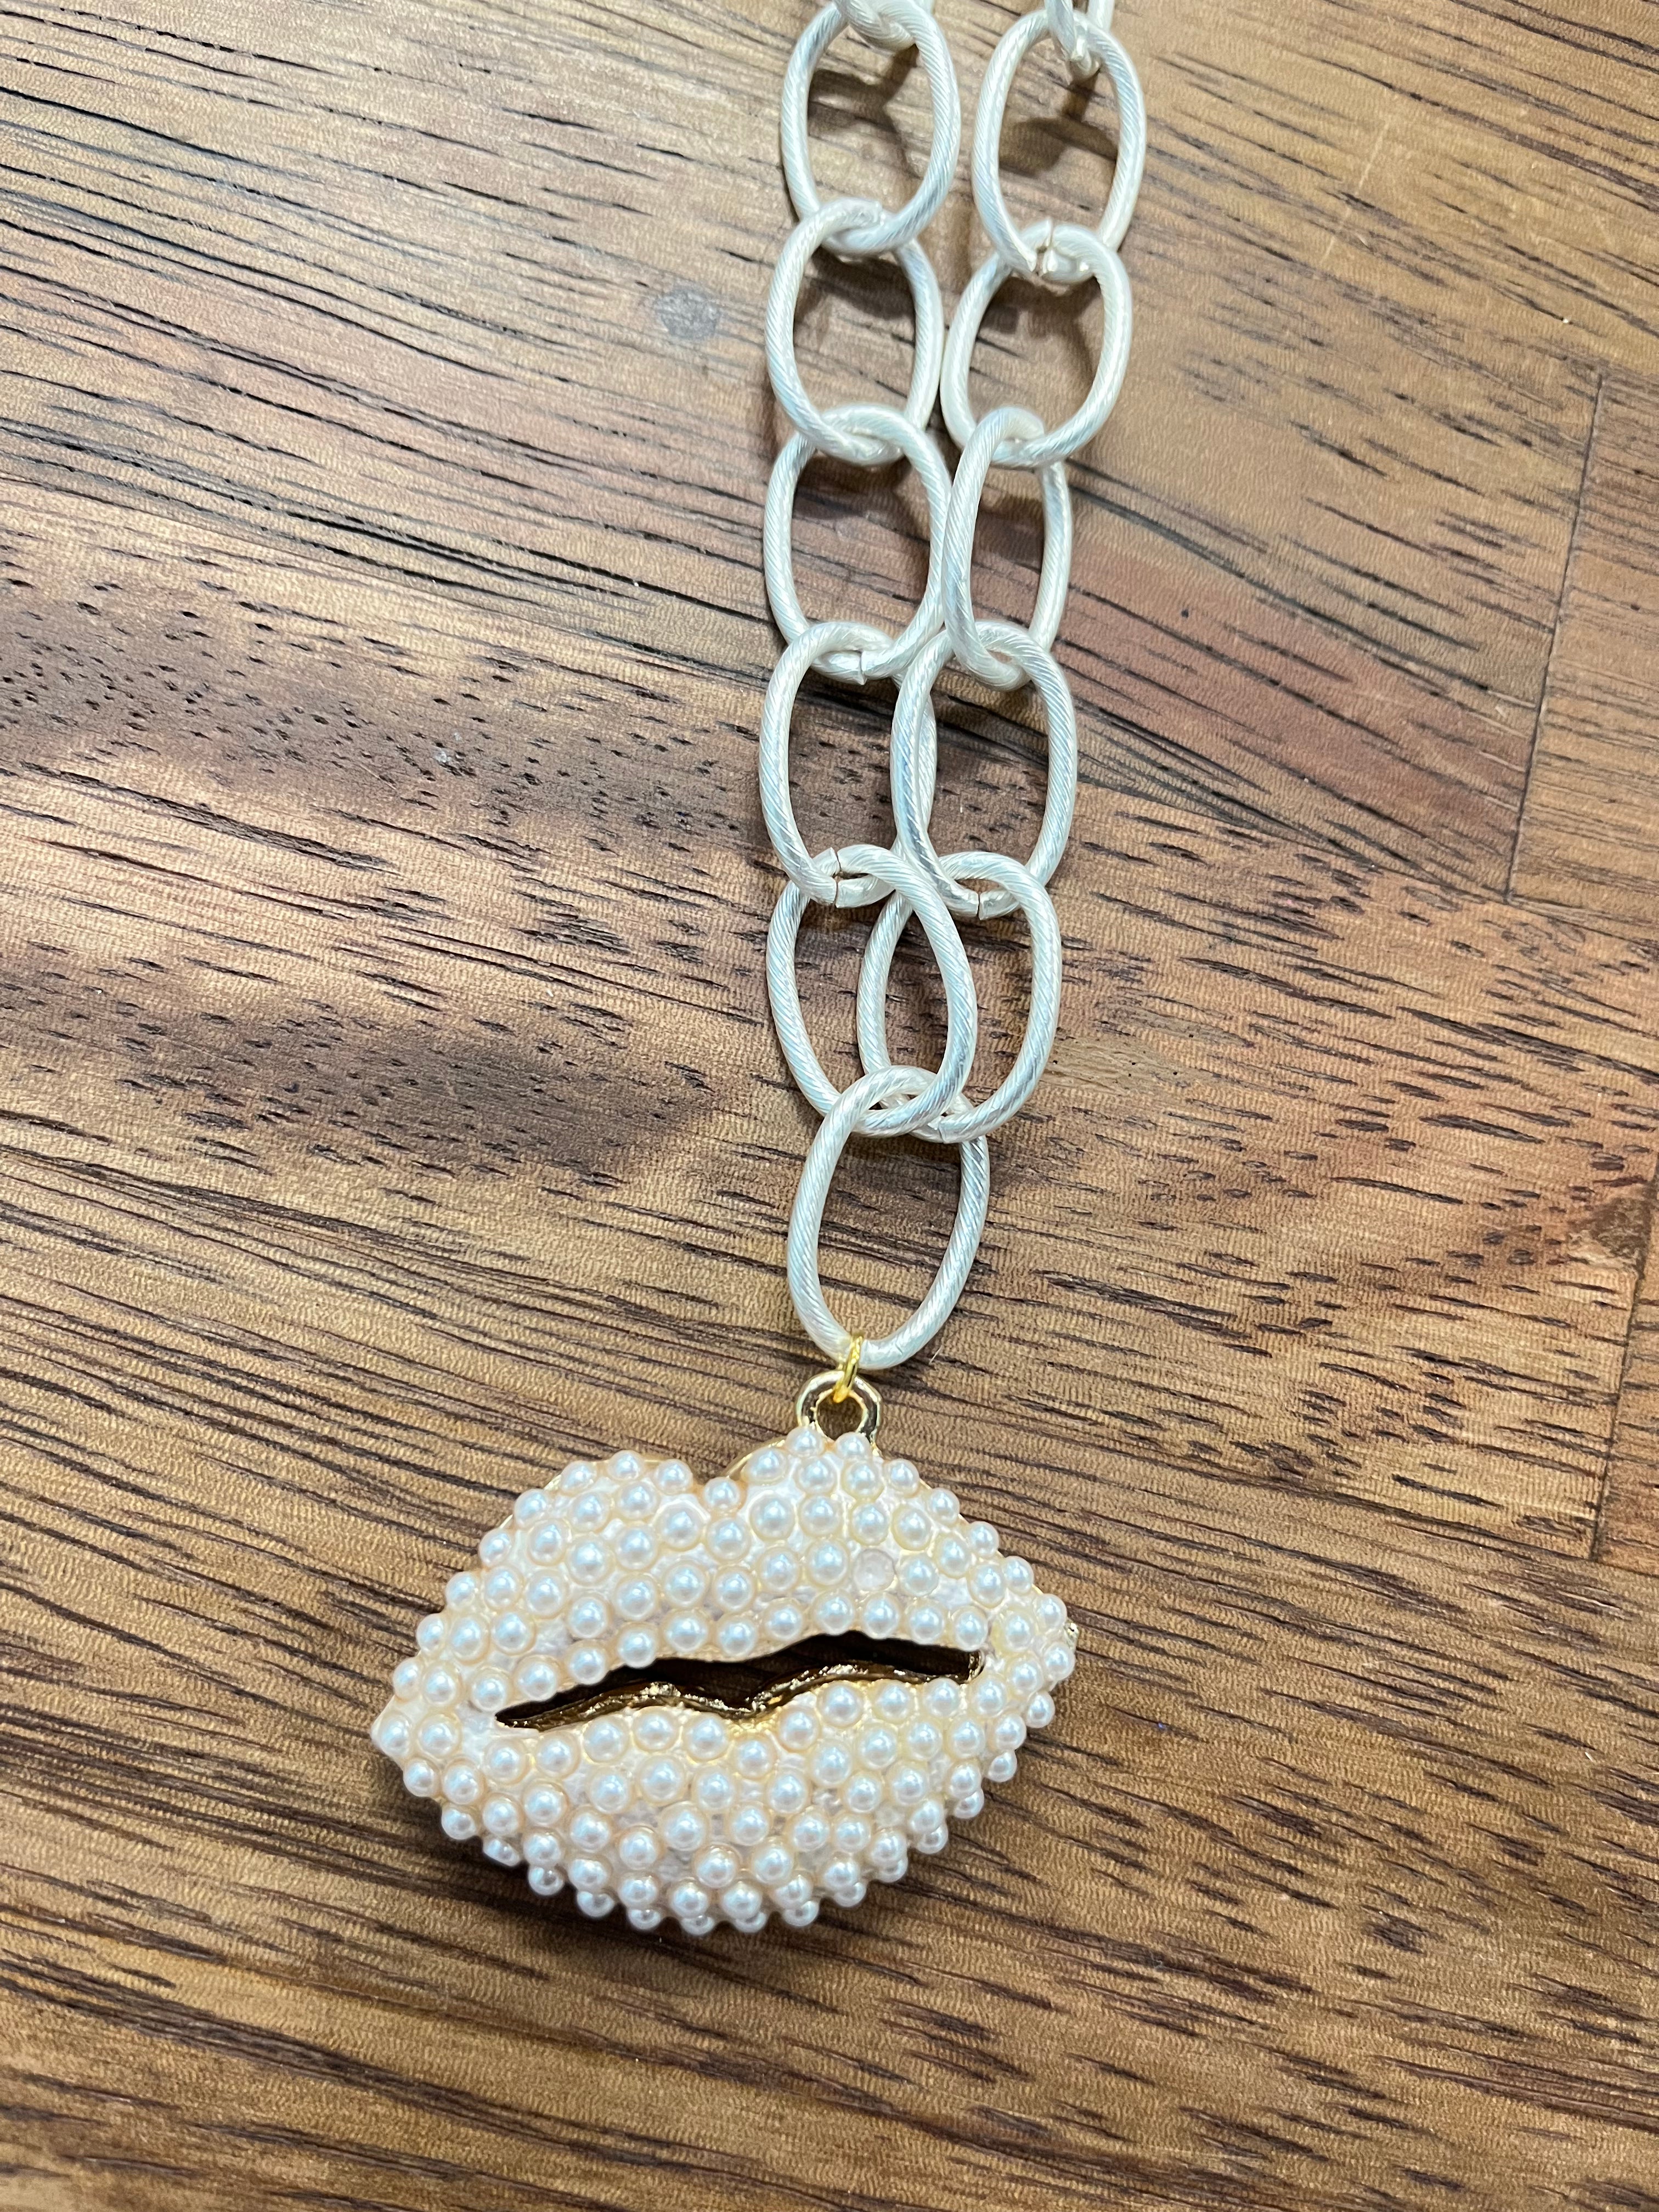 “Puckered Pearls” Necklace